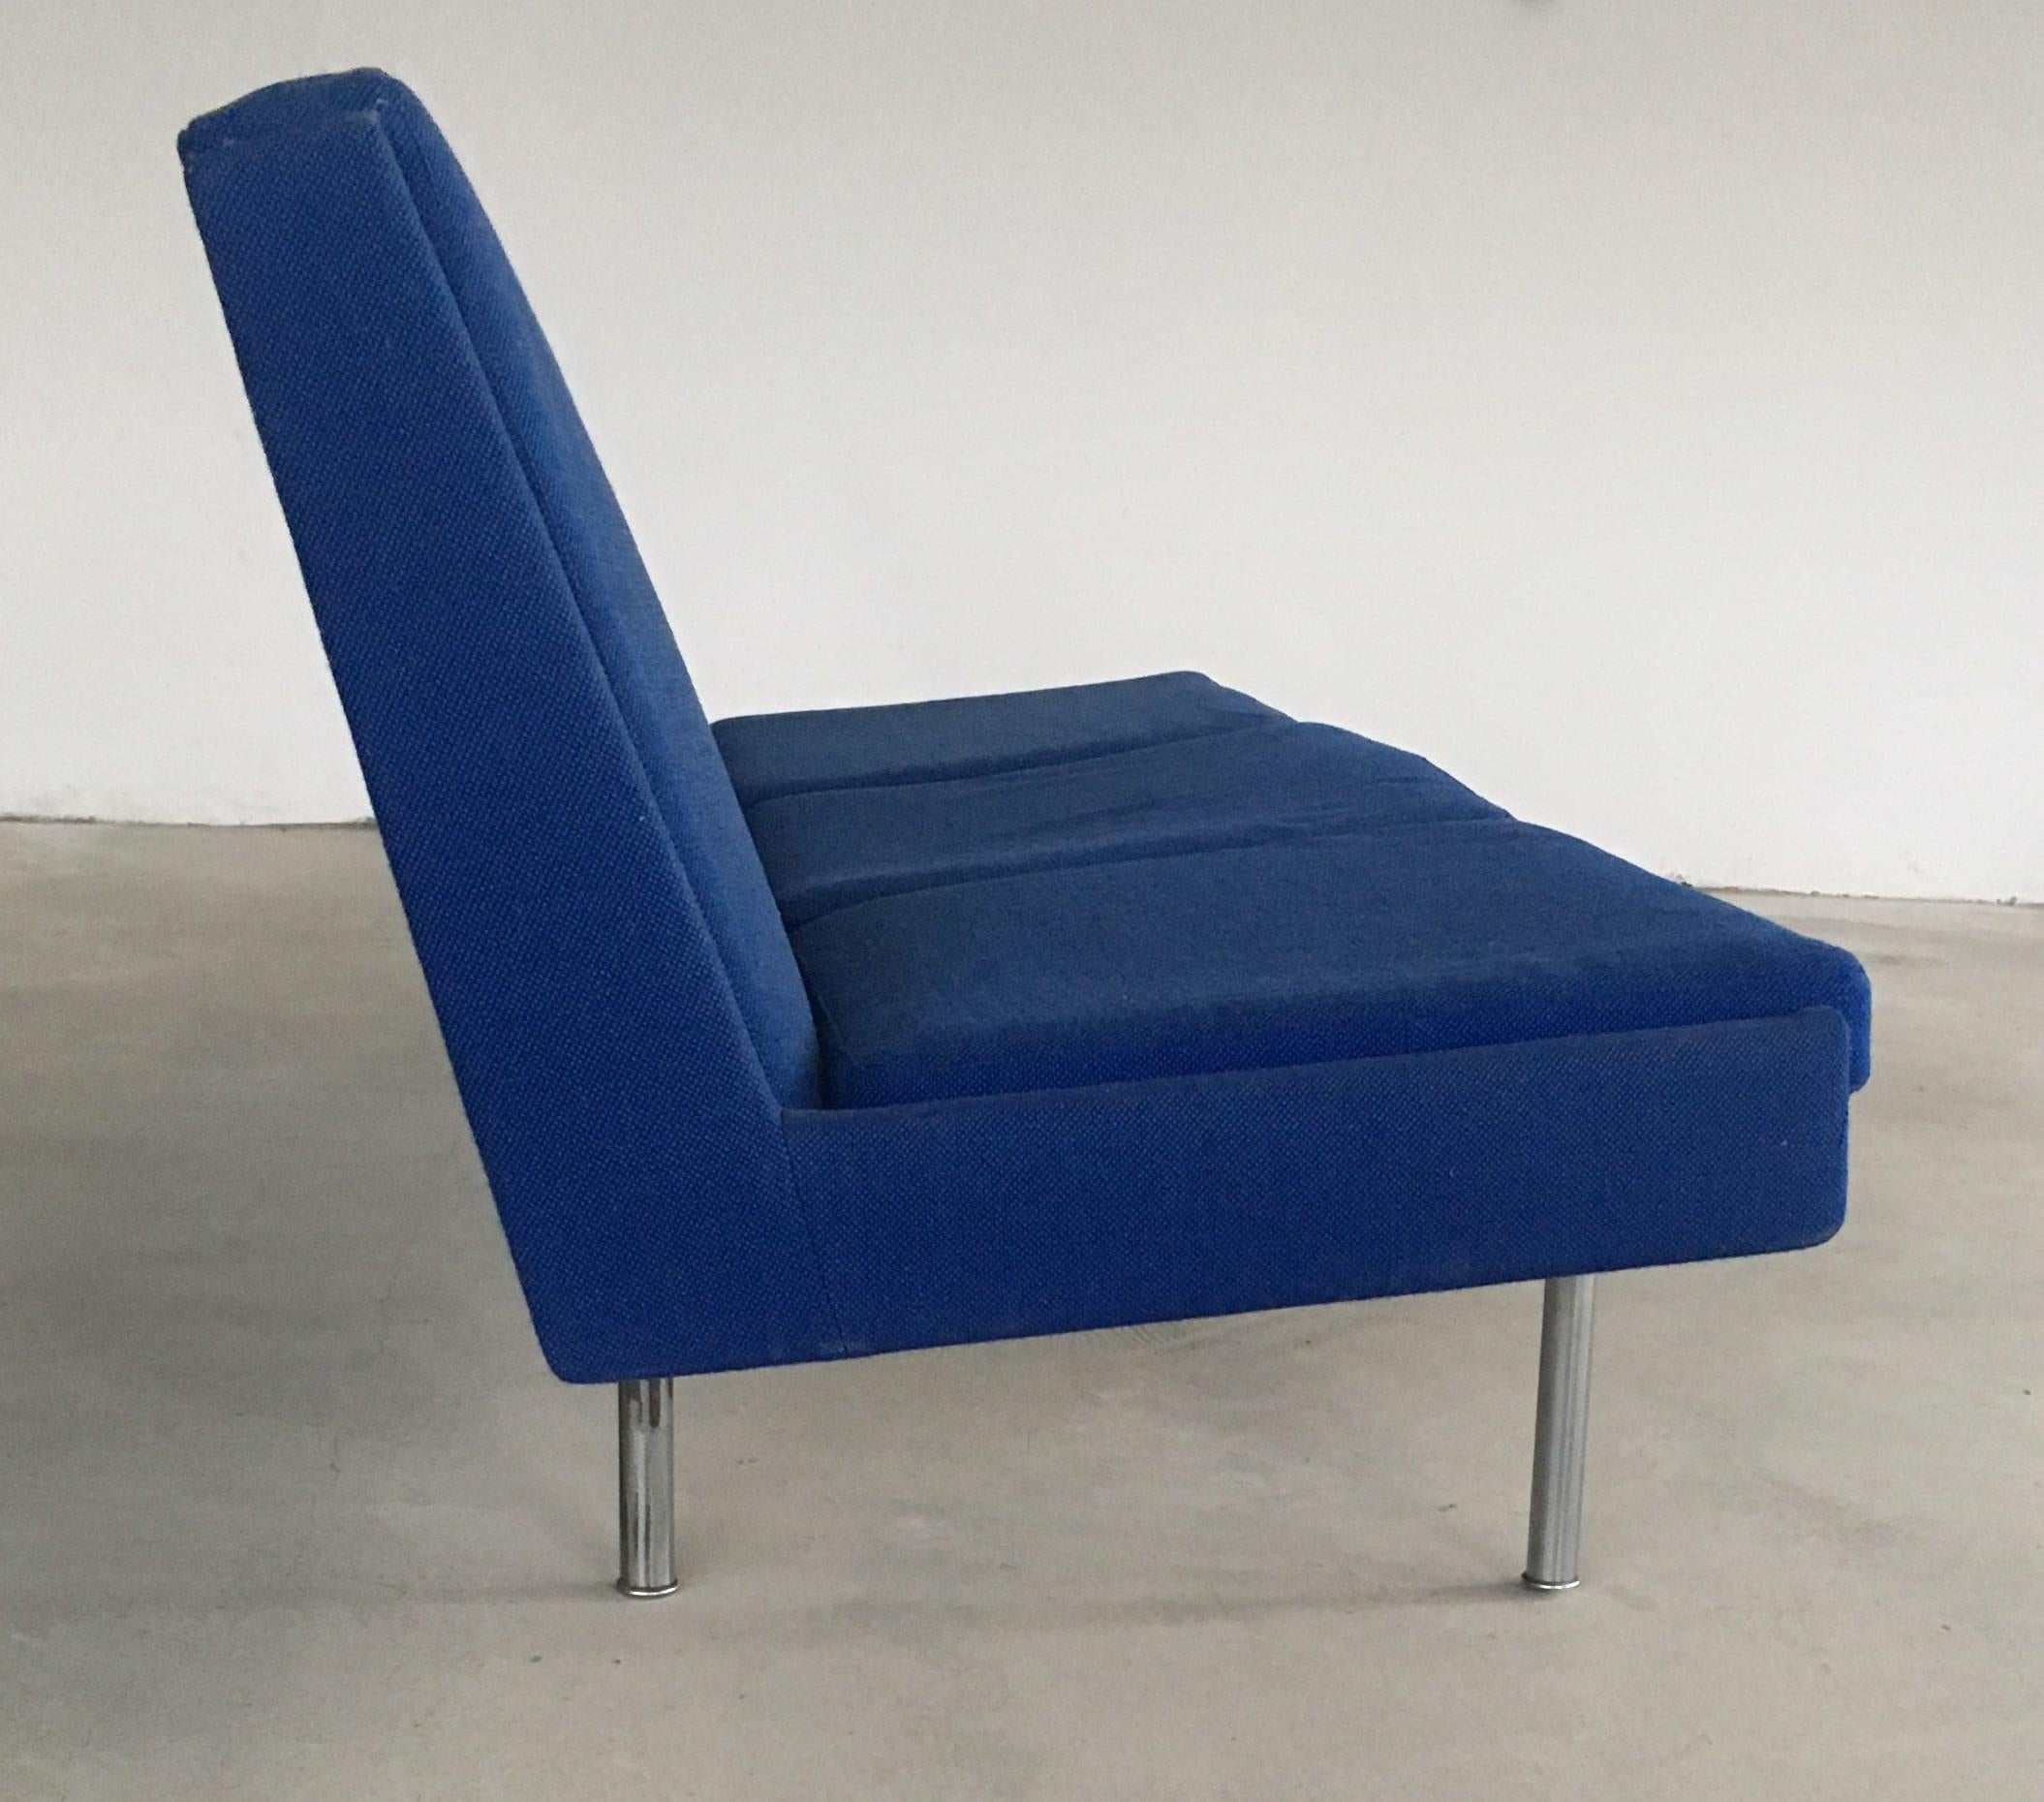 Mid-20th Century 1960s Hans J. Wegner Airport Sofa in Original Blue Fabric by A.P. Stolen For Sale